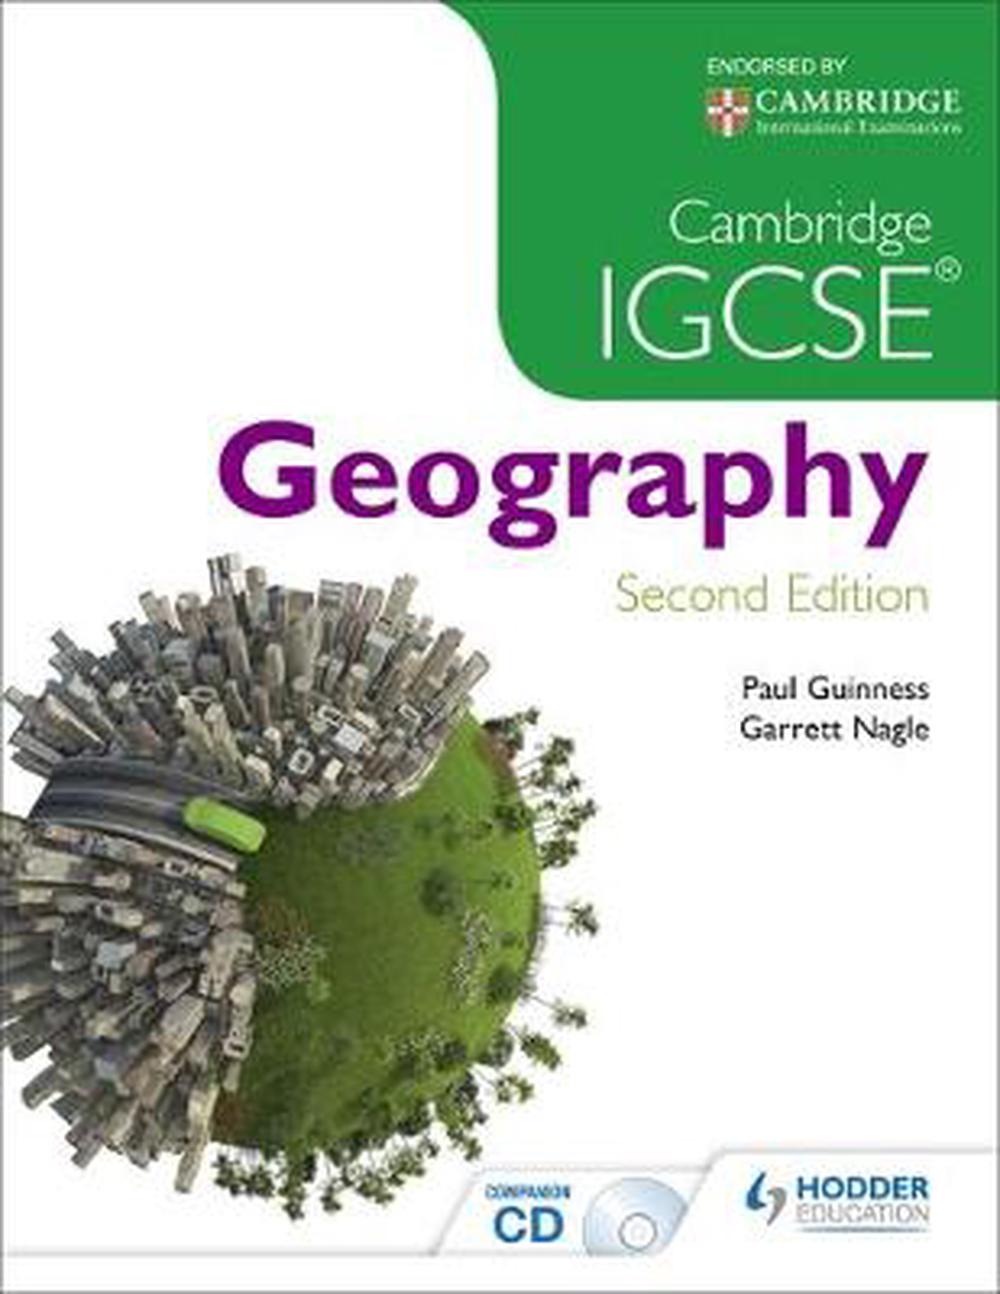 cambridge-igcse-geography-2nd-edition-by-heather-kennett-english-free-shipping-9781471807275